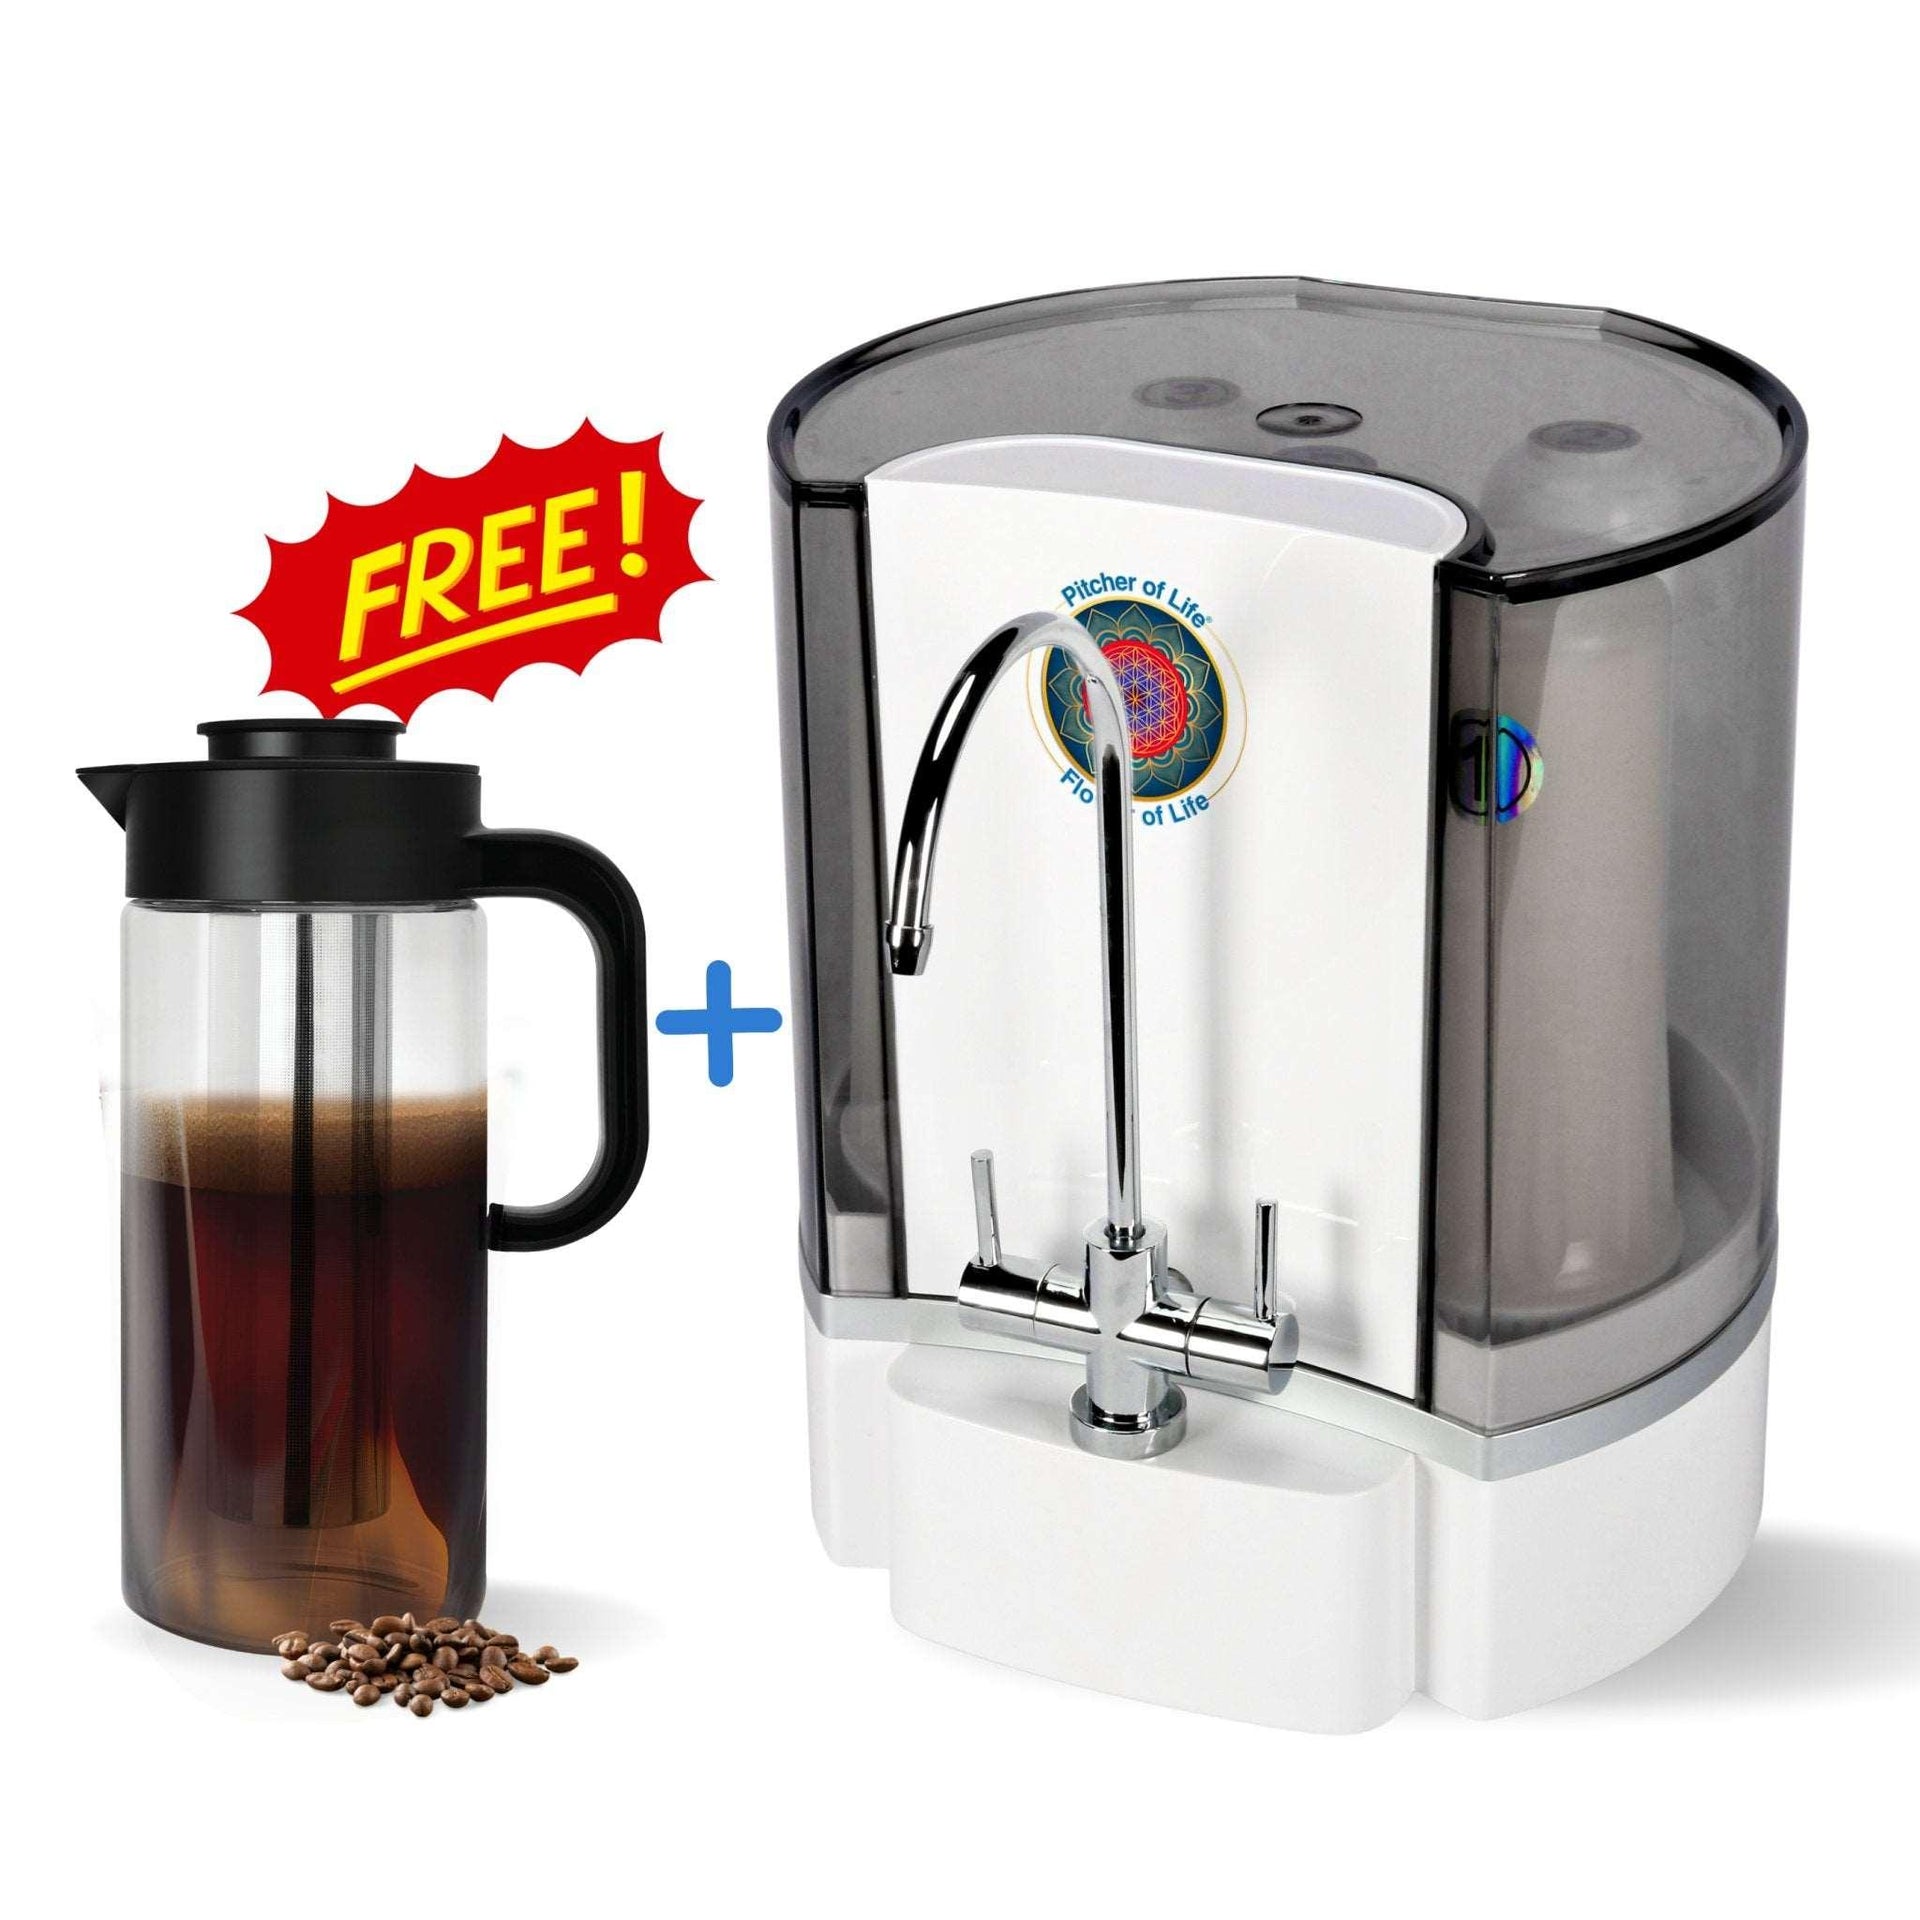 https://pitcheroflife.com/cdn/shop/products/life-sciences-hydrogen-alkaline-bio-energy-water-system-includes-free-bonus-life-borosilicate-glass-water-pitcher-with-infuser-360109.jpg?v=1697925148&width=1920